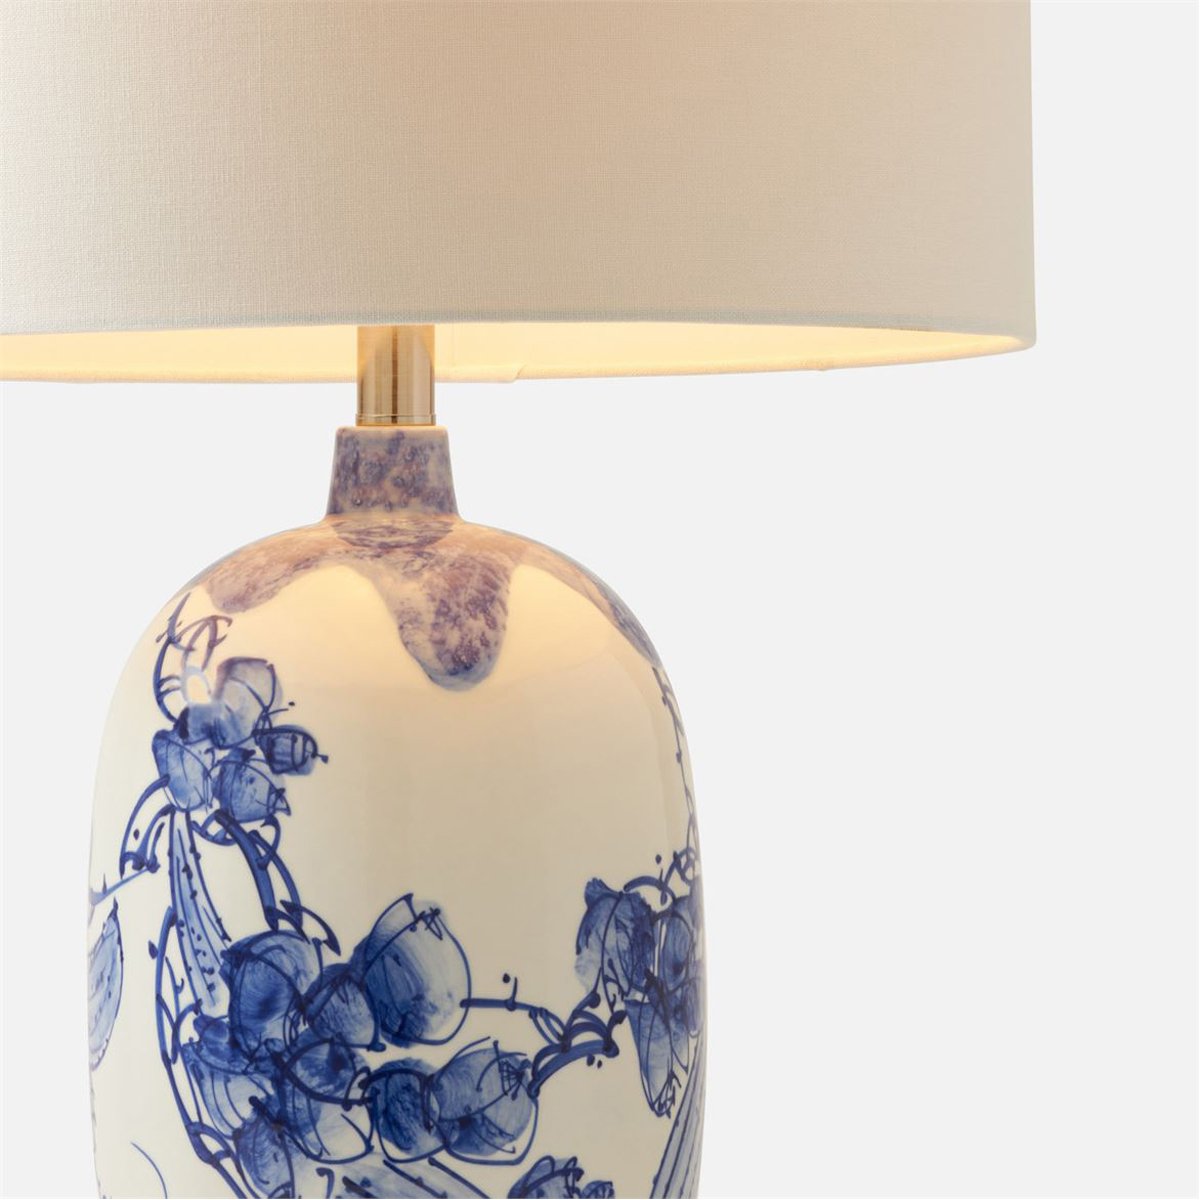 Made Goods Aziah Table Lamp in Blue White Gloss Ceramic